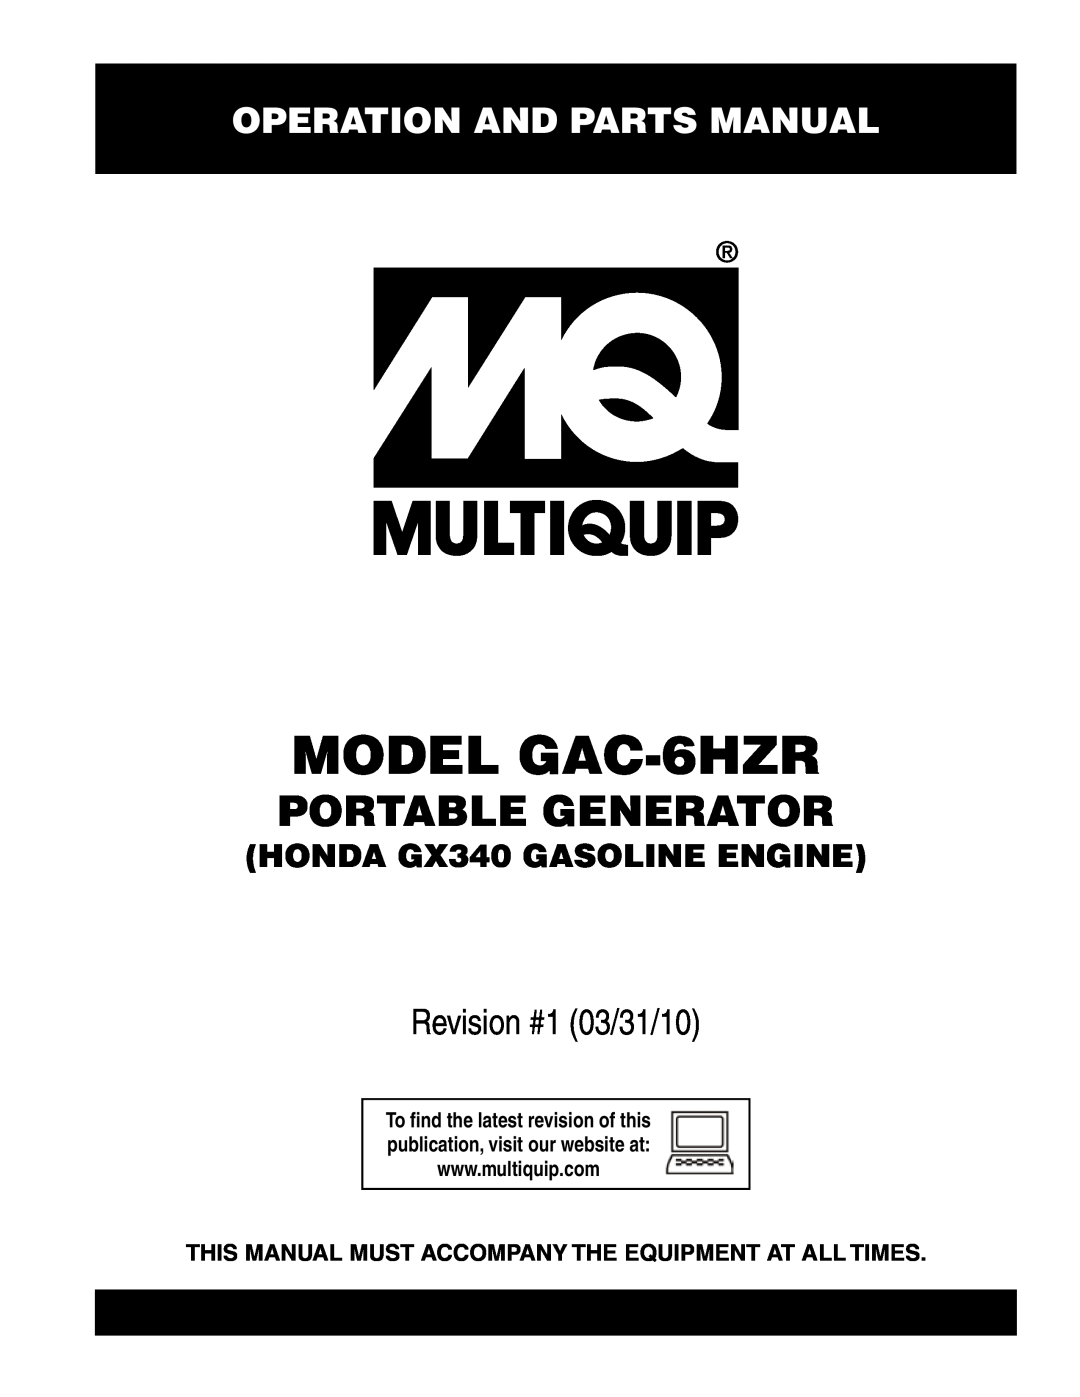 Multiquip GAC-6HZR manual Operation and Parts Manual, This Manual Must Accompany The Equipment At All Times 